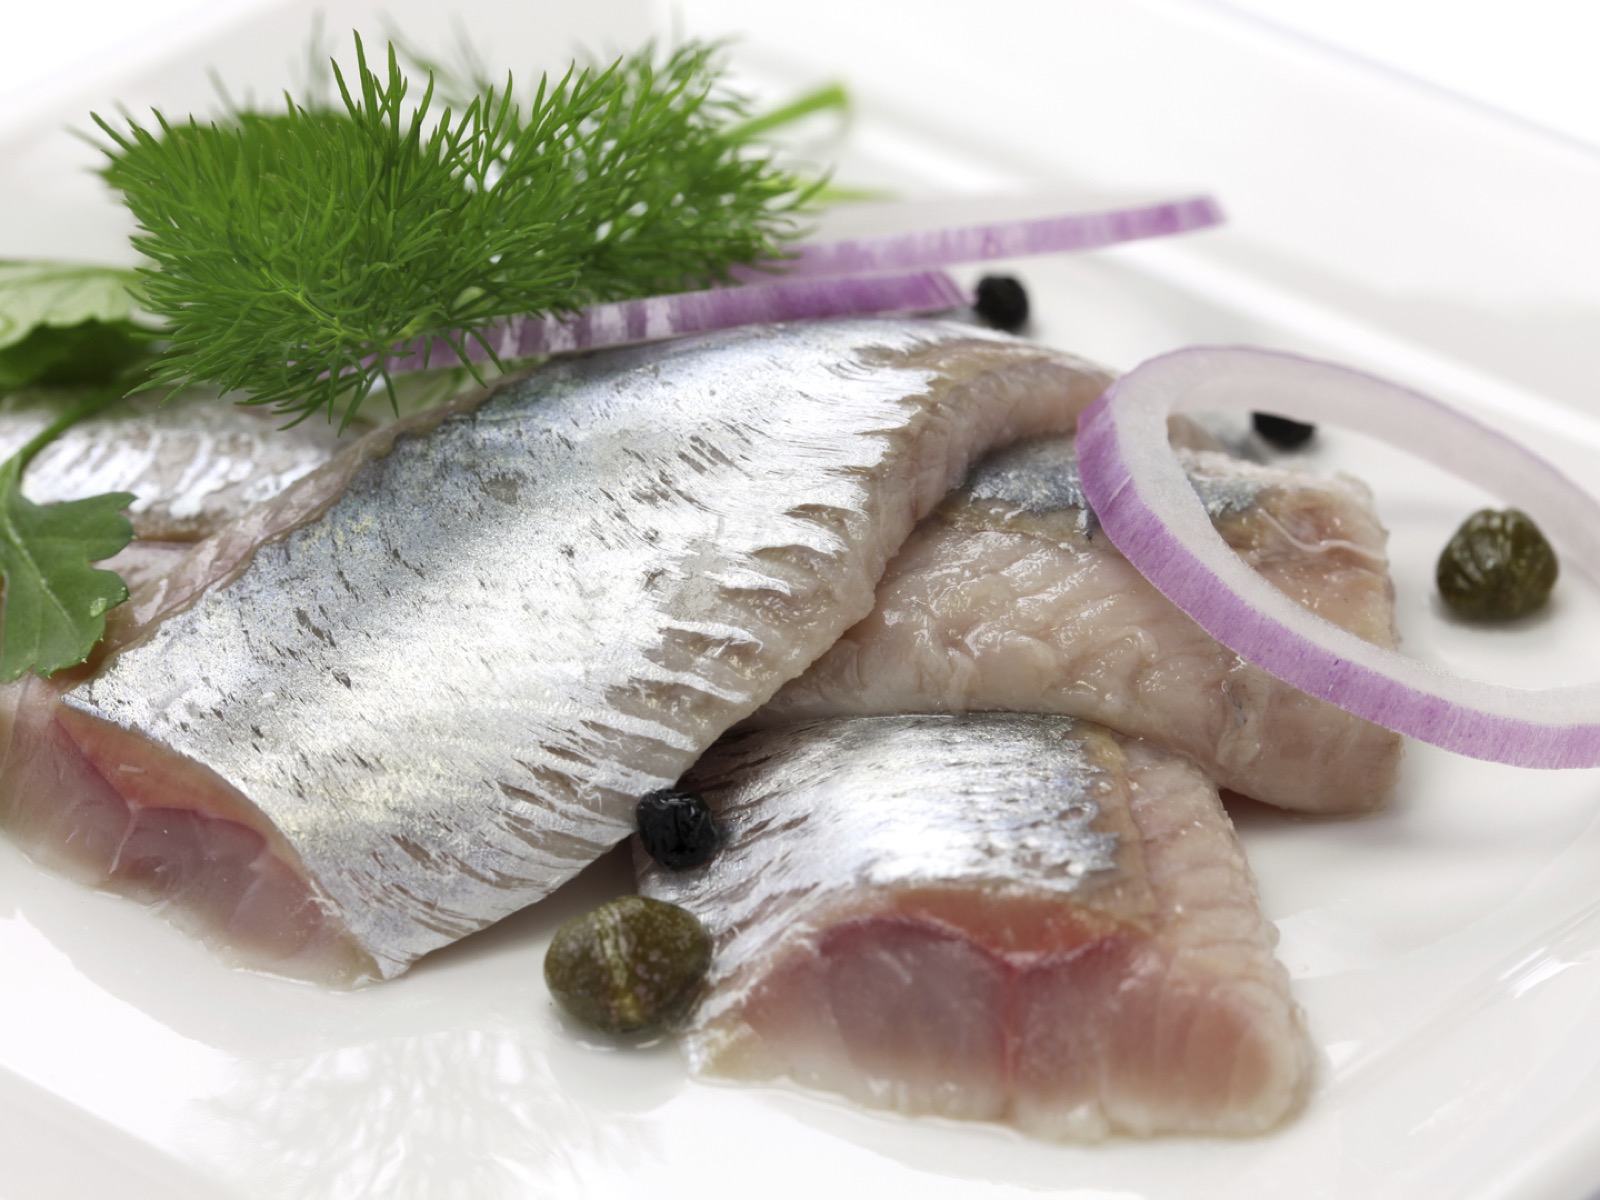 🥩 Only a Master Chef Can Identify 16/23 of These Uncooked Meats Raw Herring